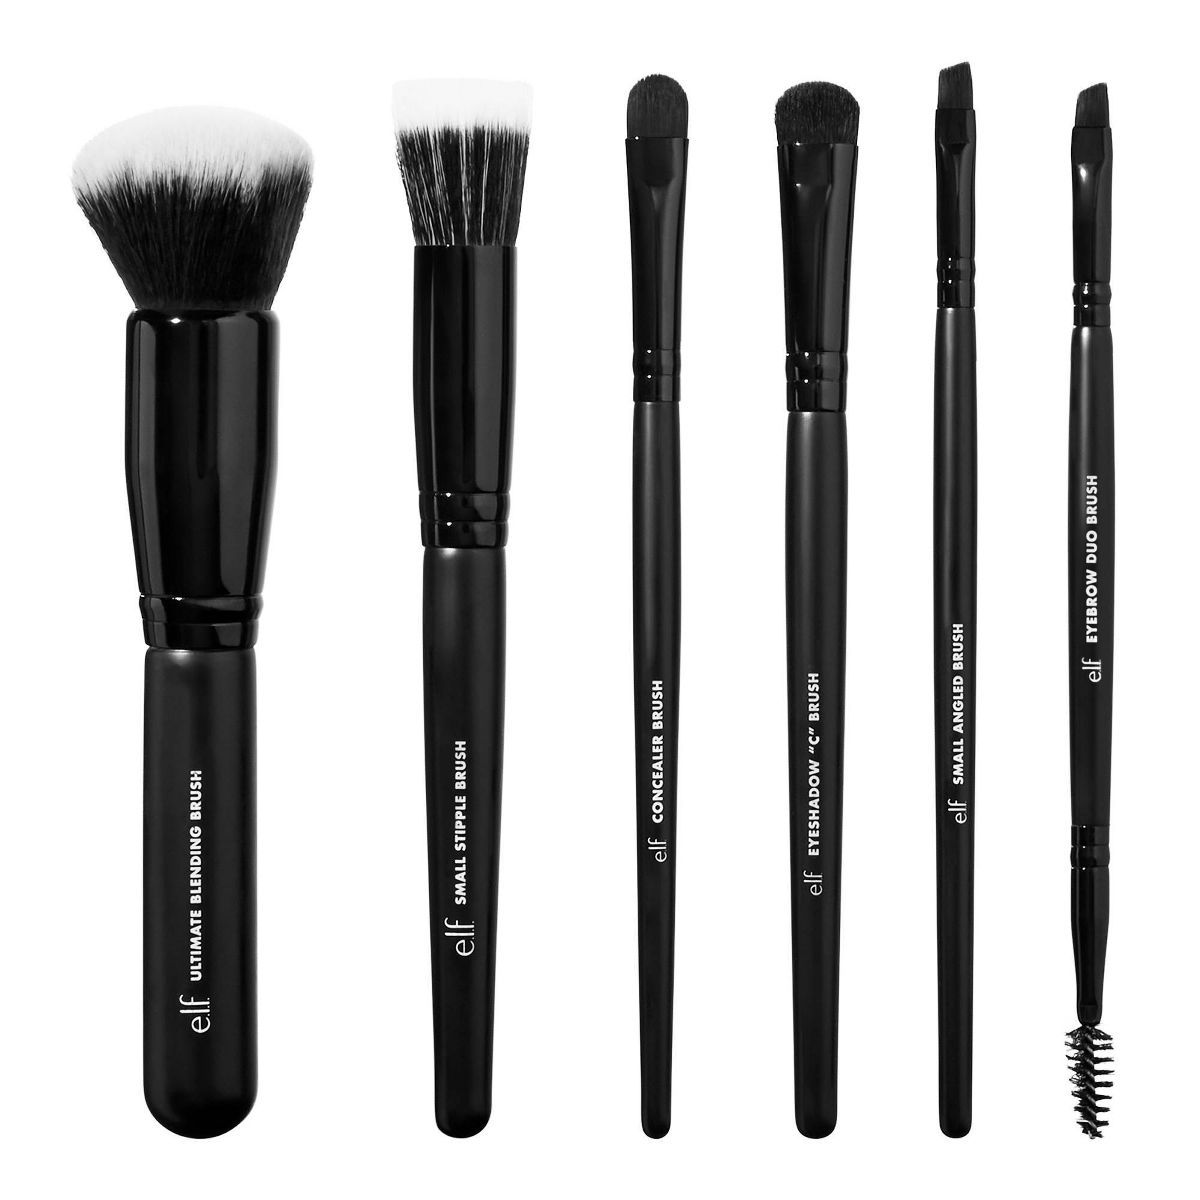 e.l.f. Flawless Face Brush Collection - 6pc | Target